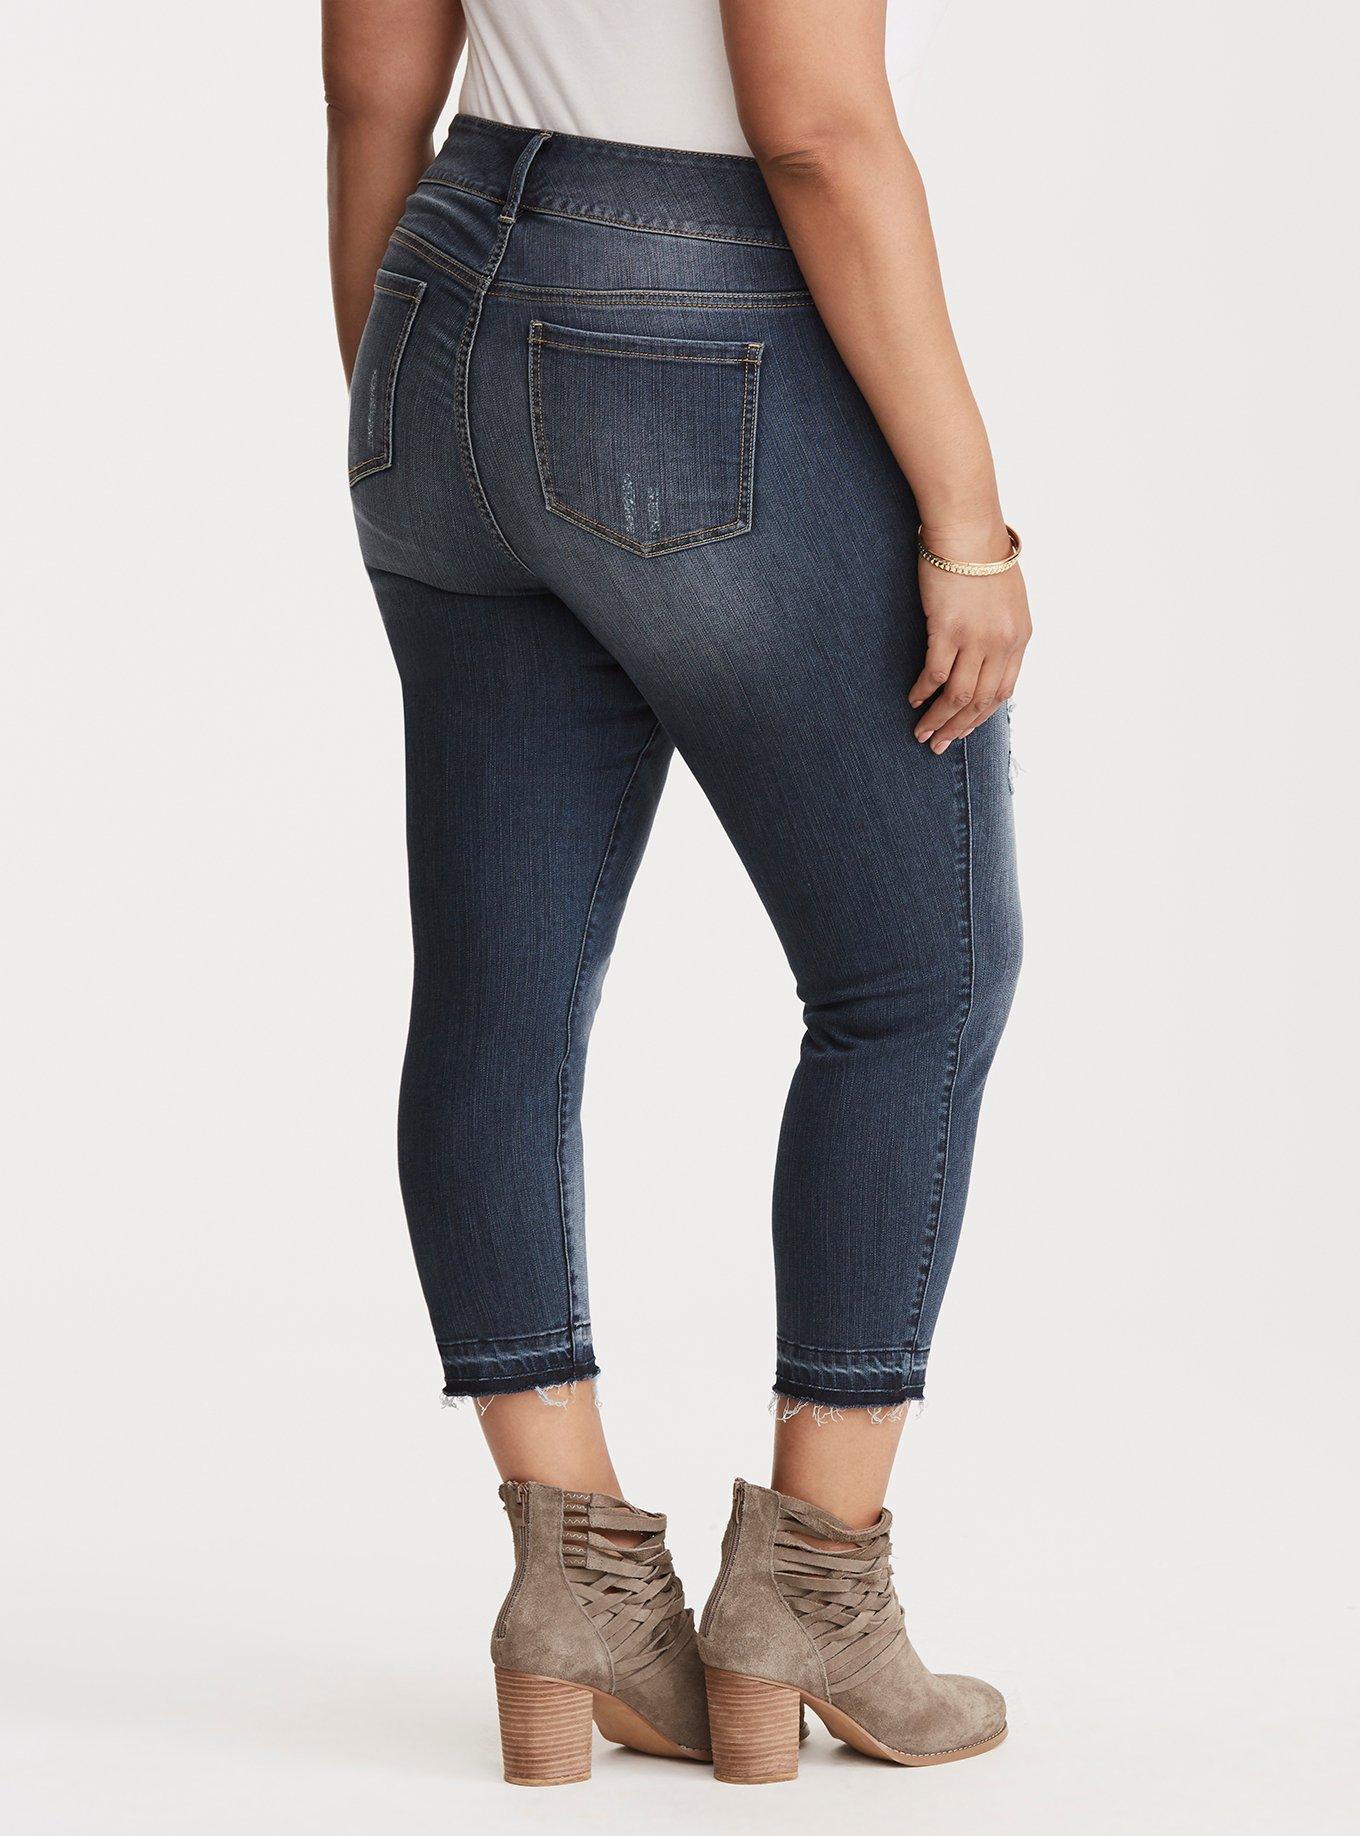 Plus Size - Torrid Premium Stretch Cropped Jeggings - Dark Wash with ...